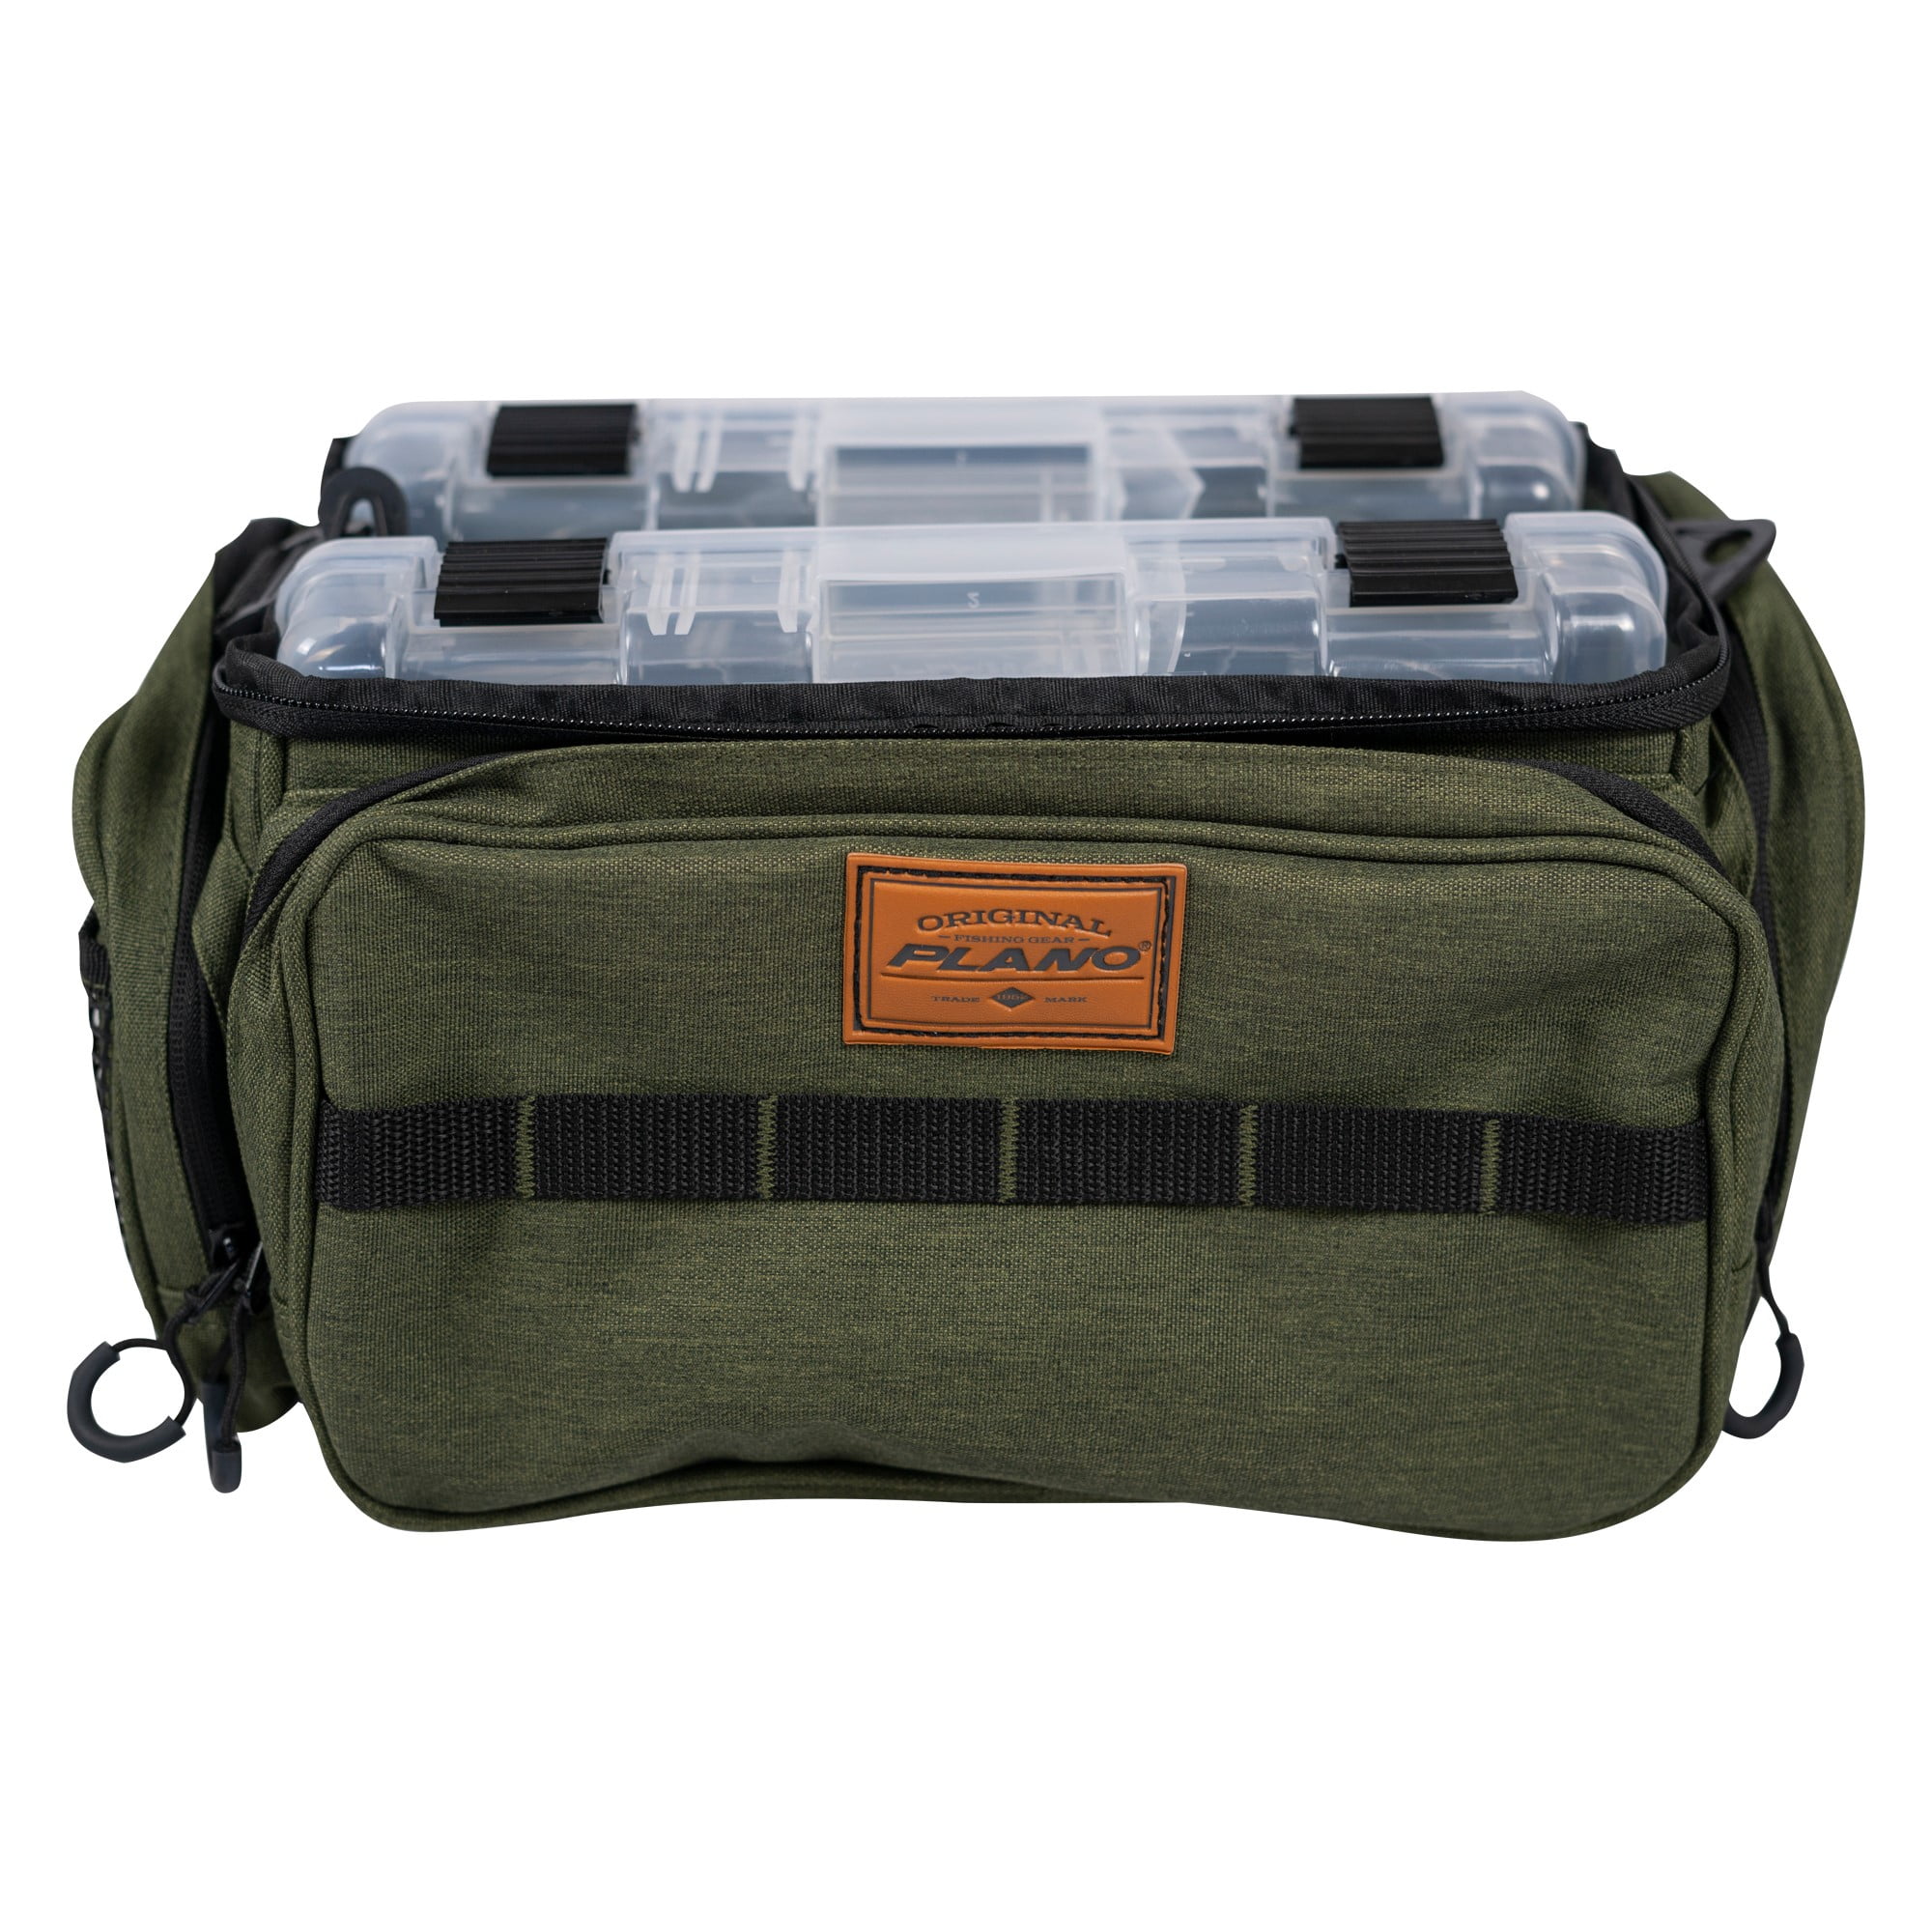 Plano Fishing 3600 Medium Size Tackle Bag with Two 3600 Size